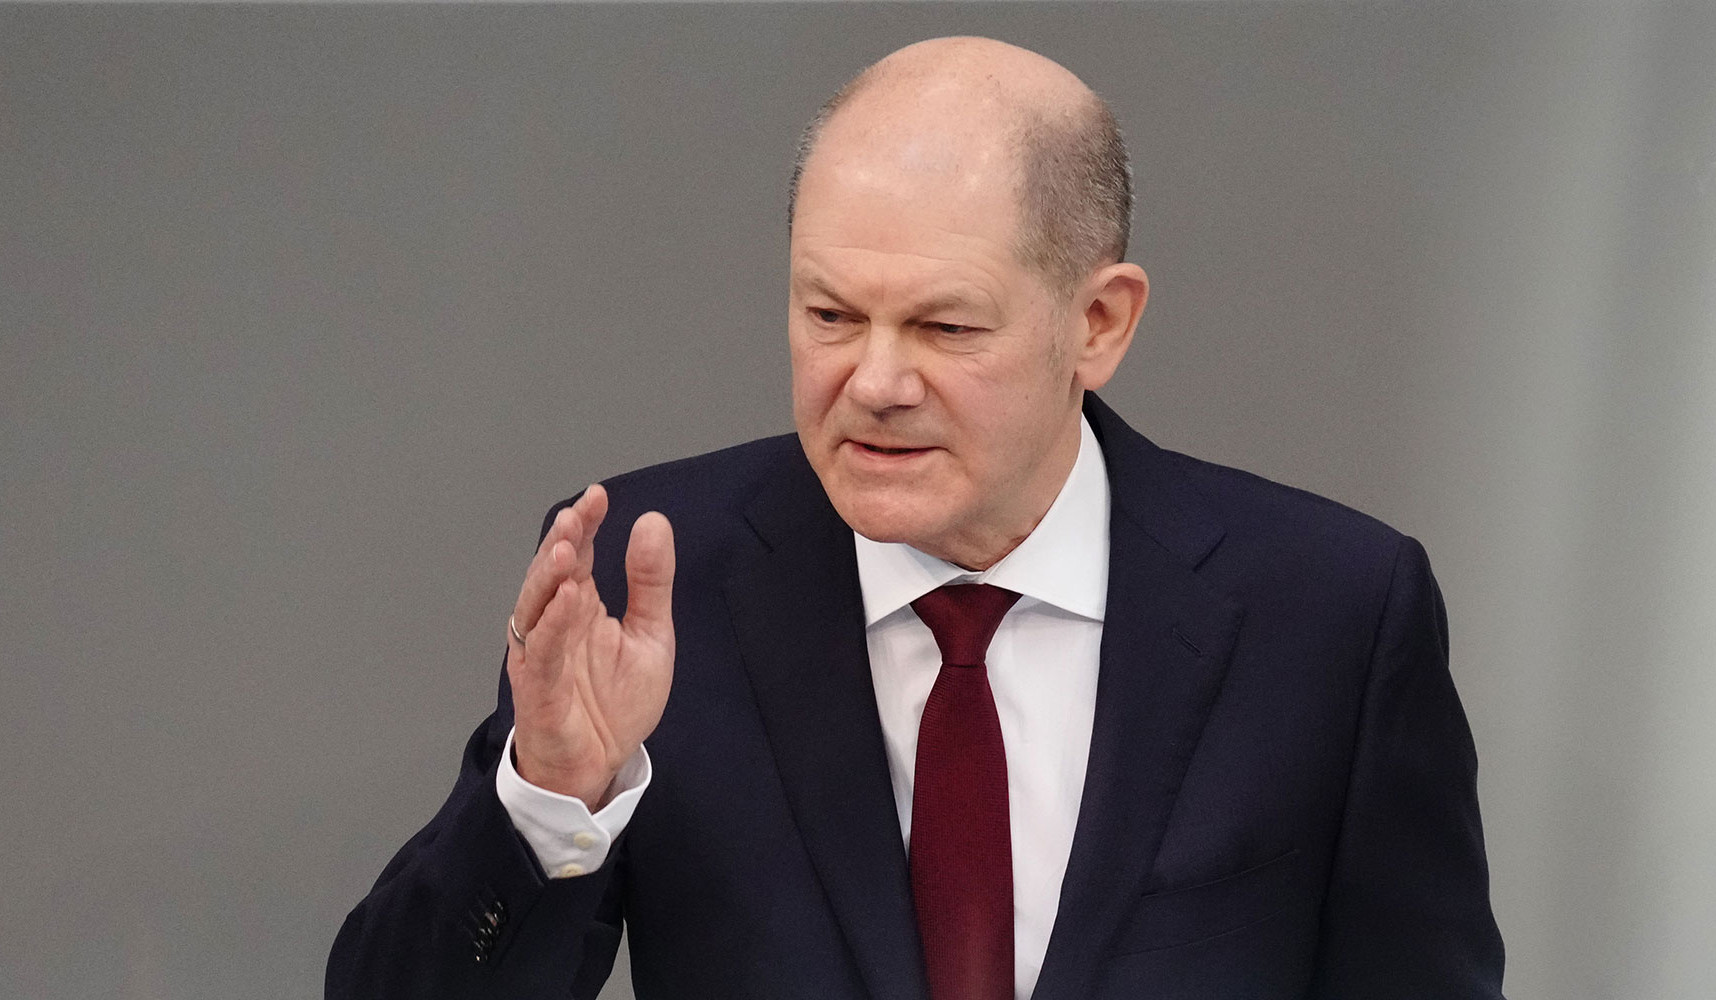 German Chancellor Scholz says he plans to speak to Putin any time soon